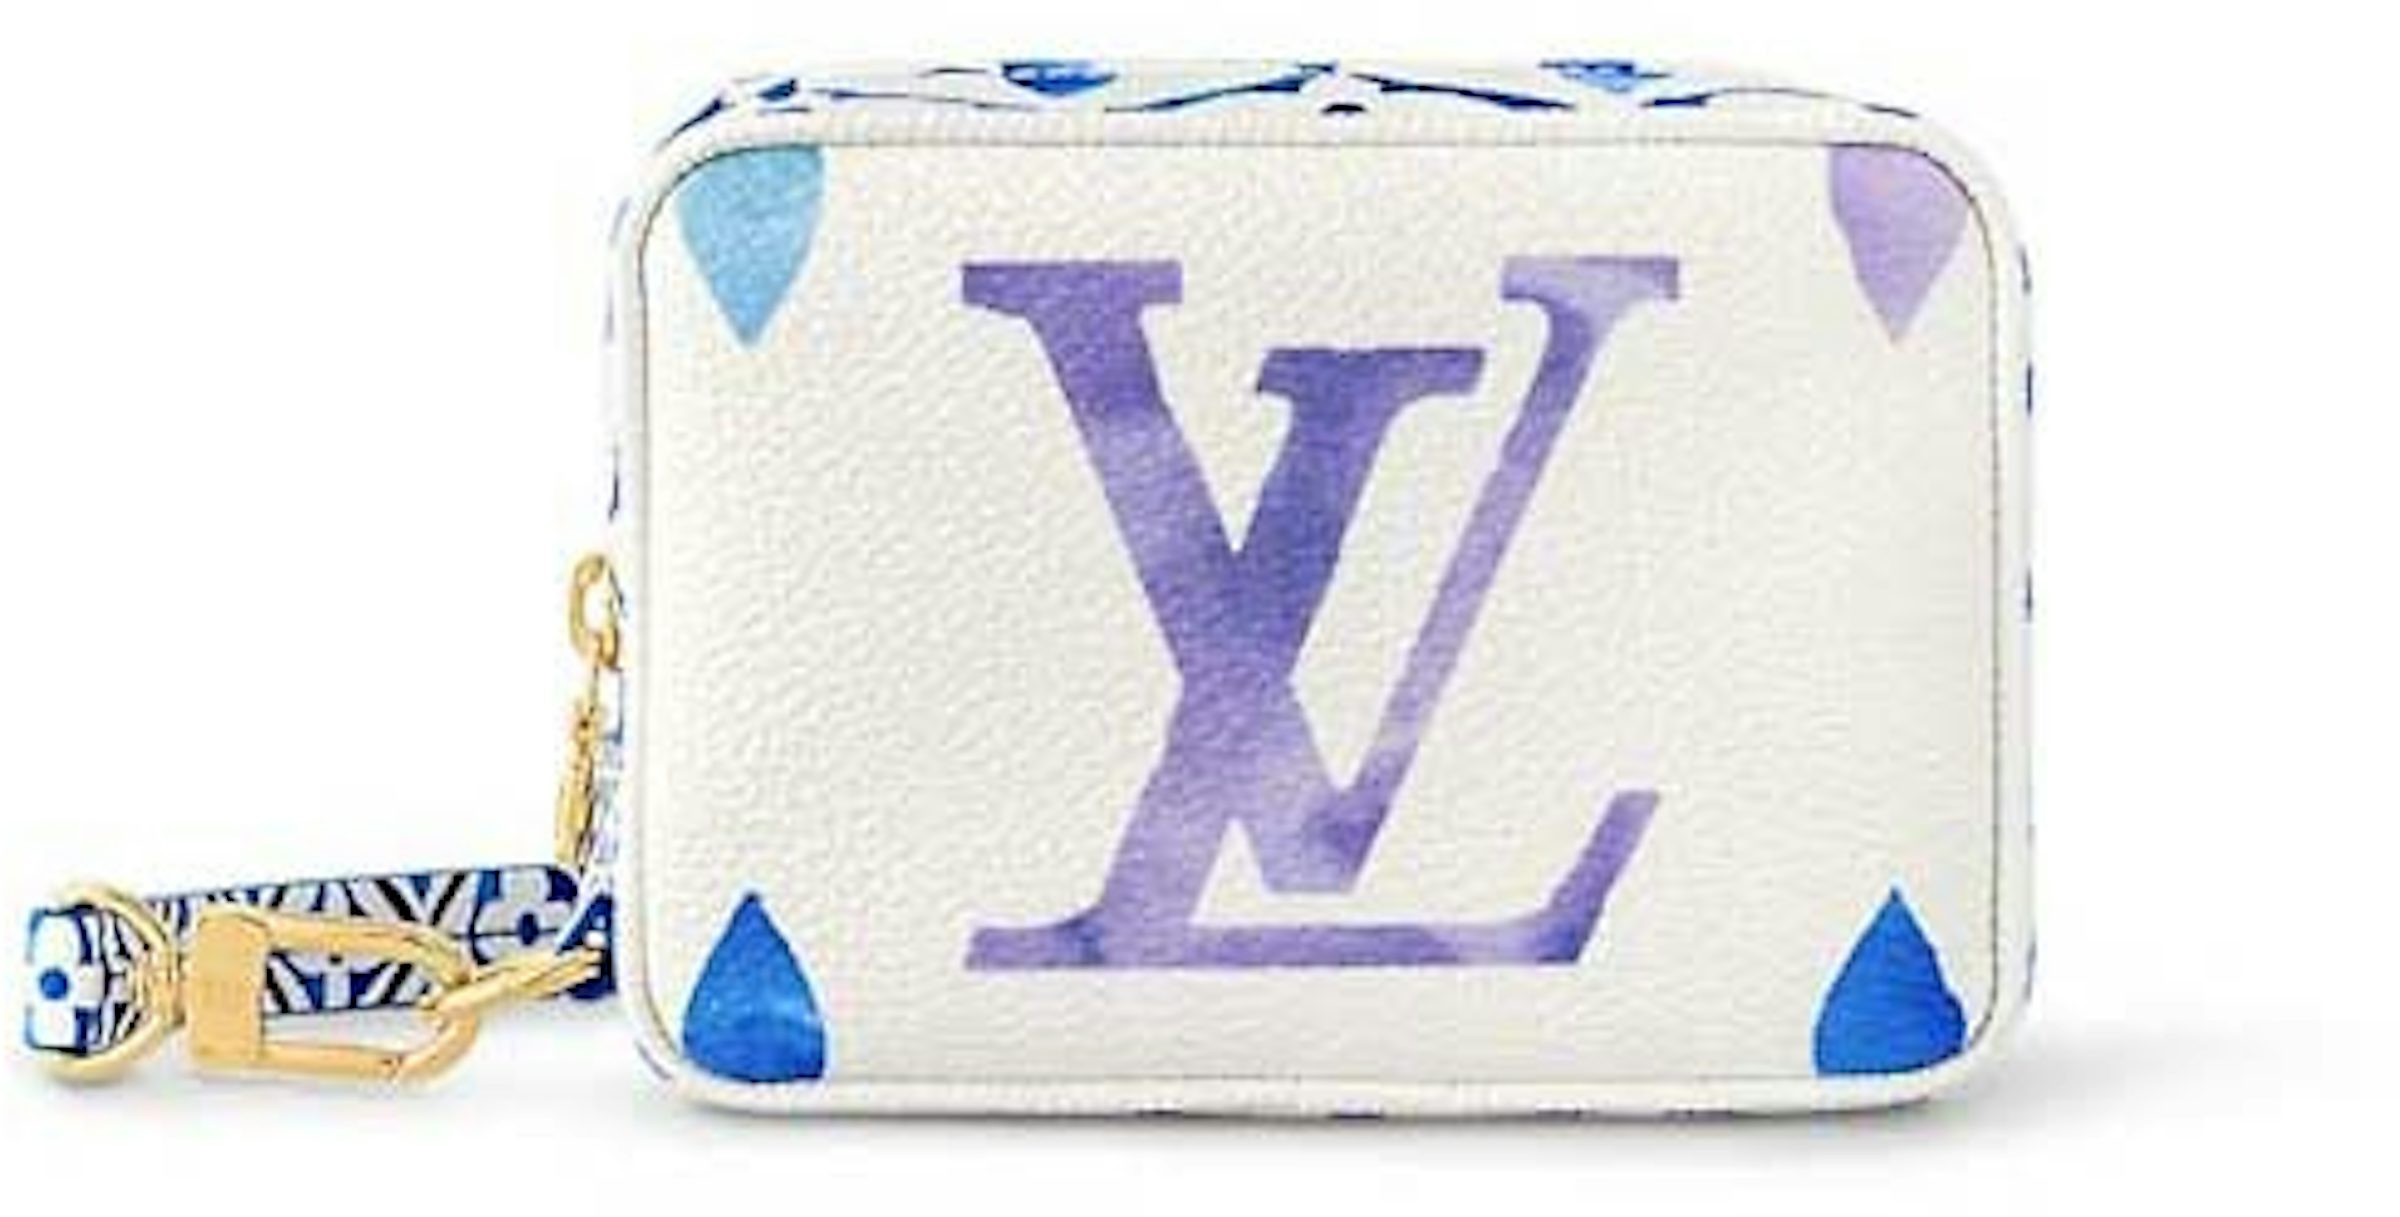 Louis Vuitton Marshmallow Sunset Kaki in Coated Canvas with Gold-tone - US